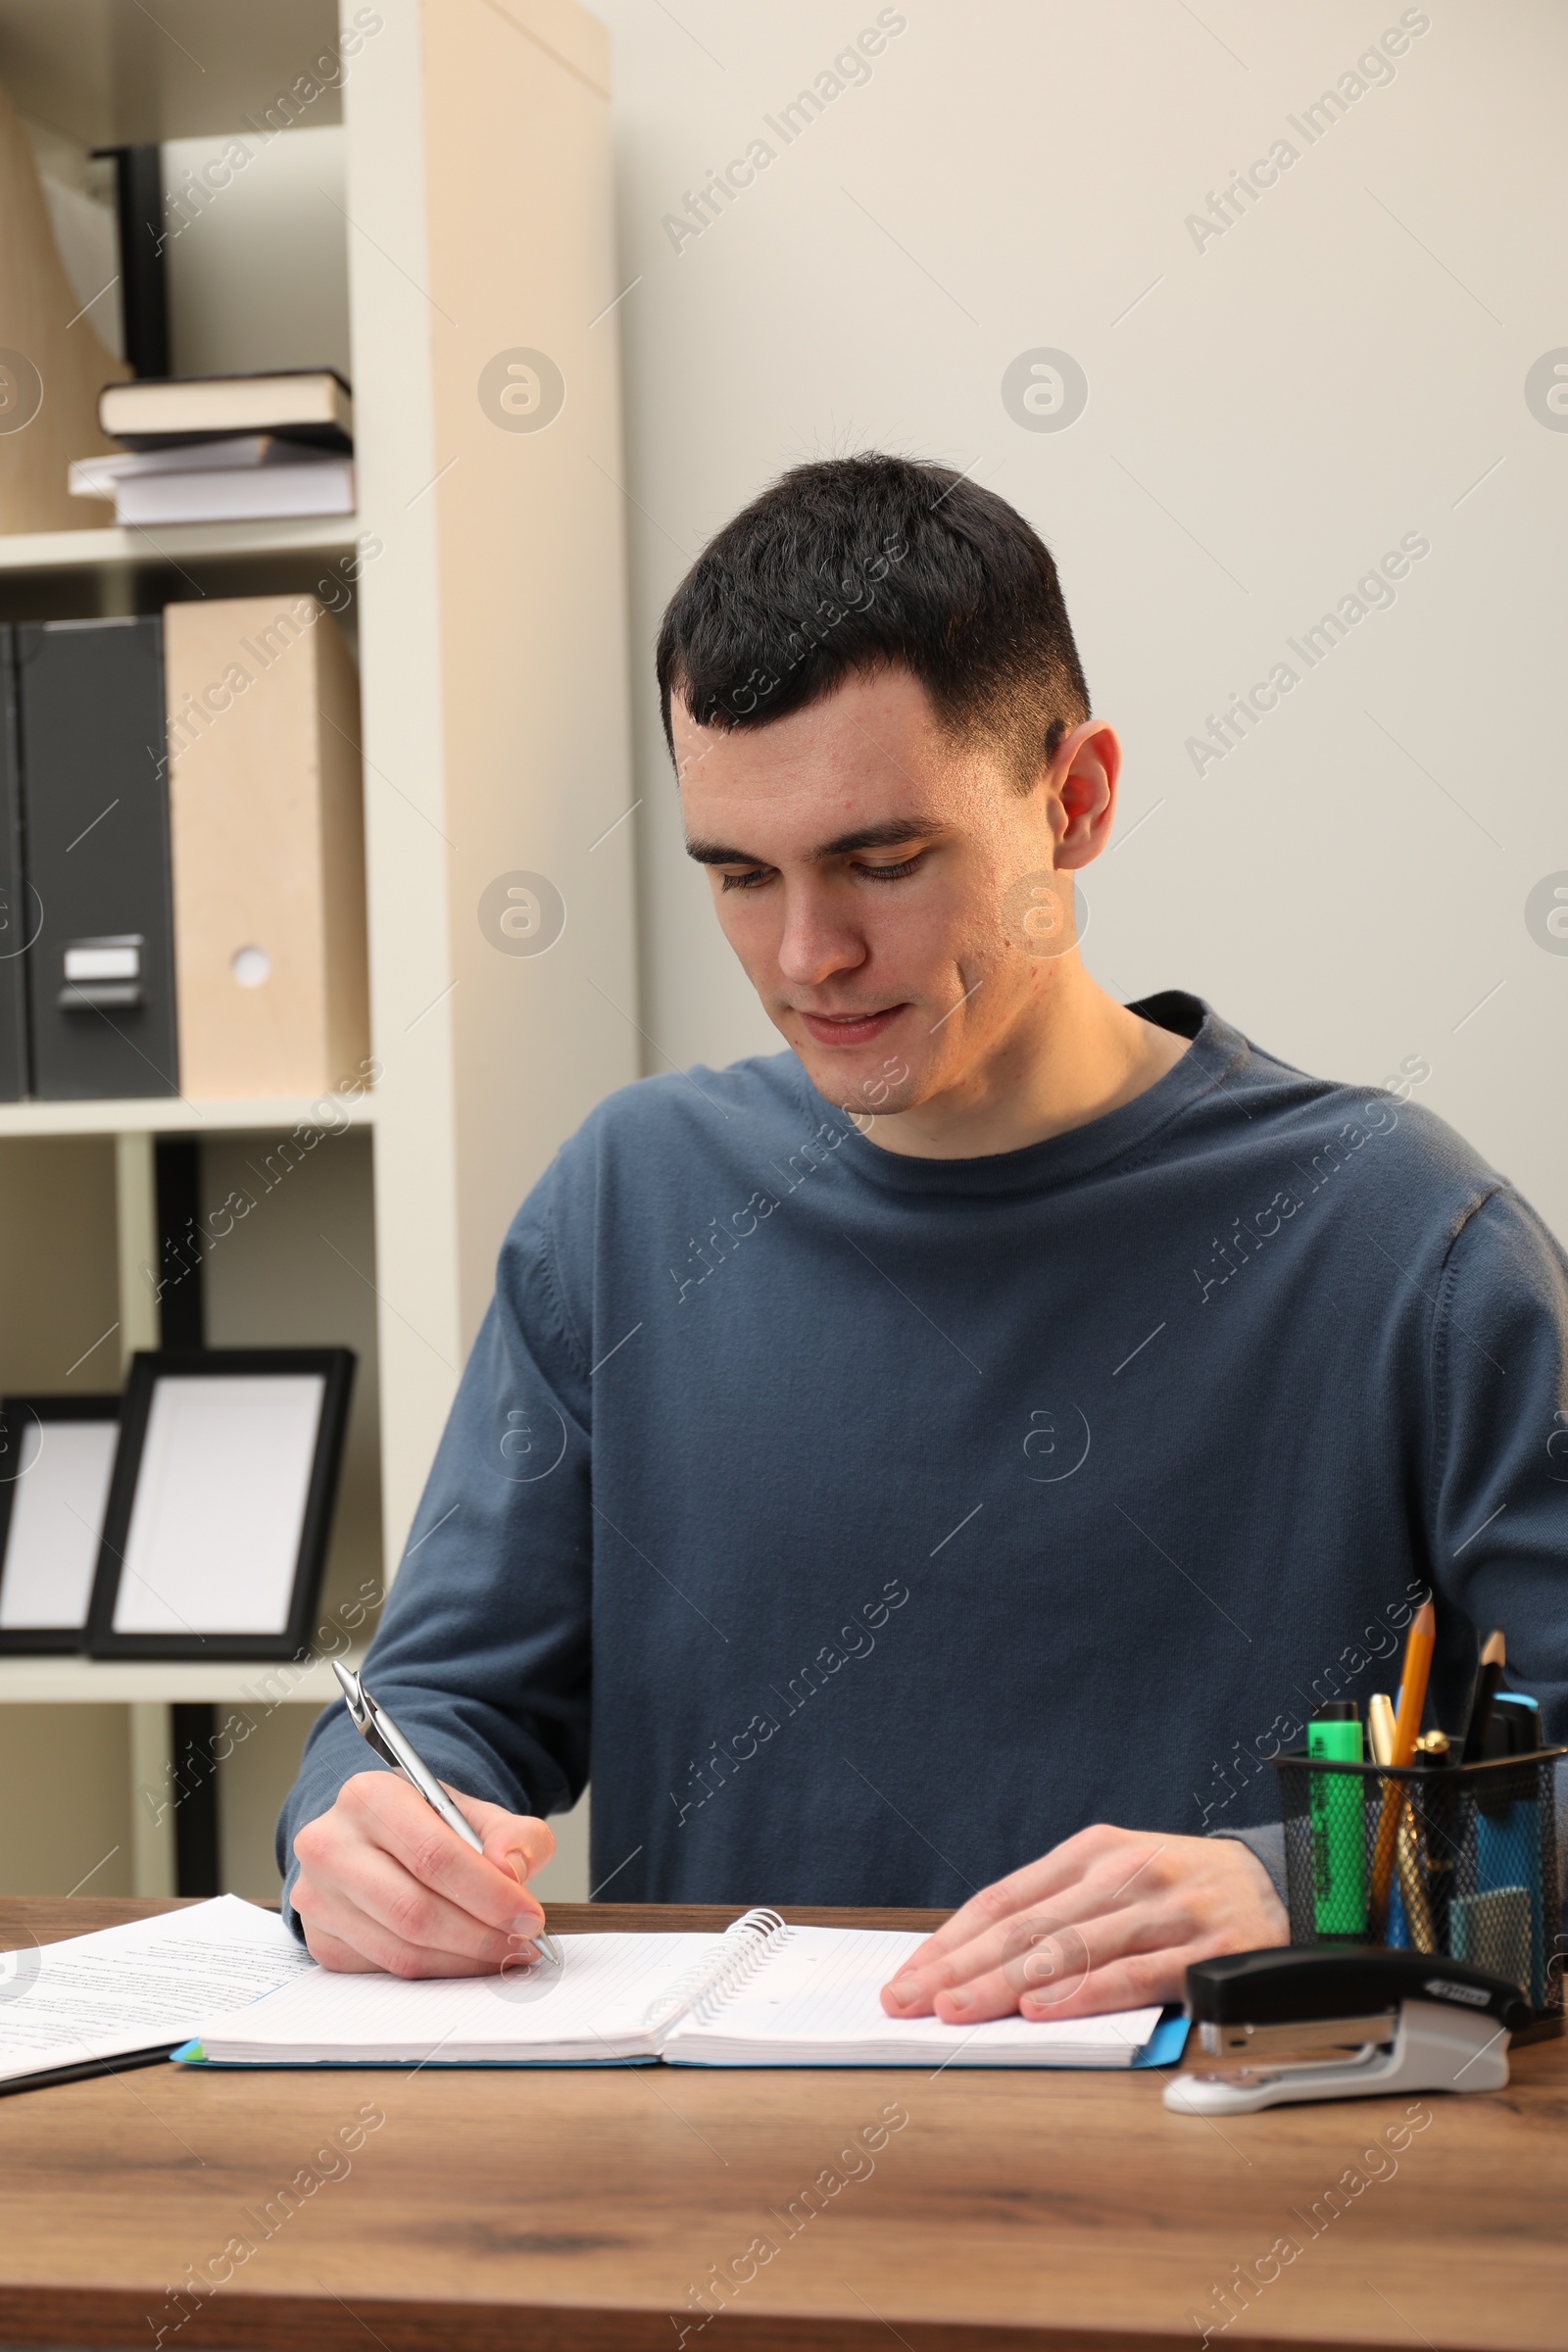 Photo of Man taking notes at wooden table in office